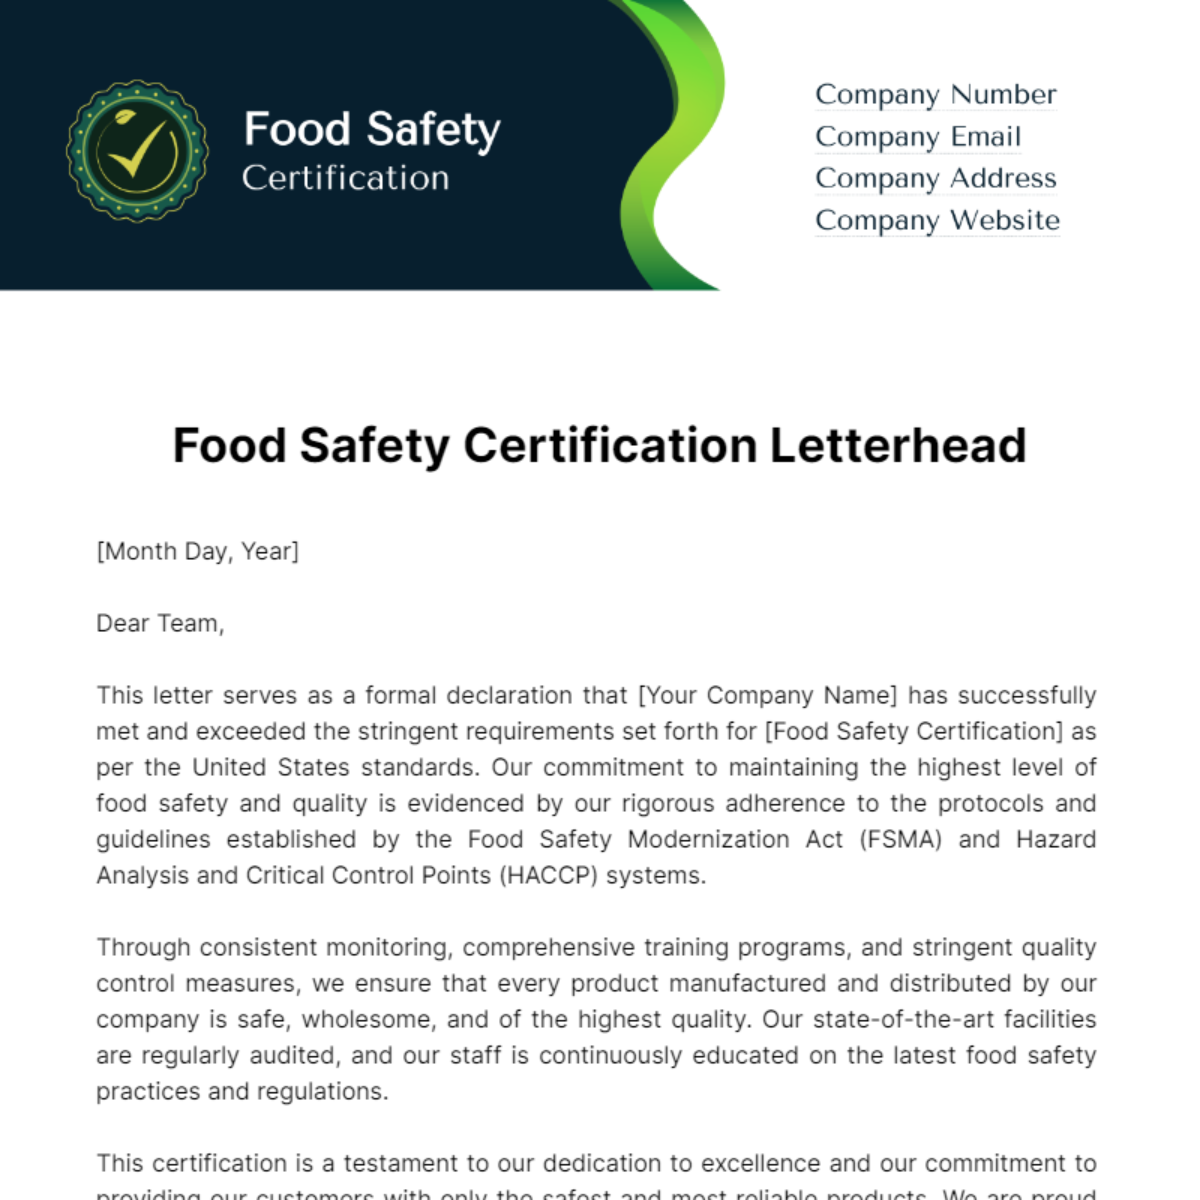 Food Safety Certification Letterhead Template